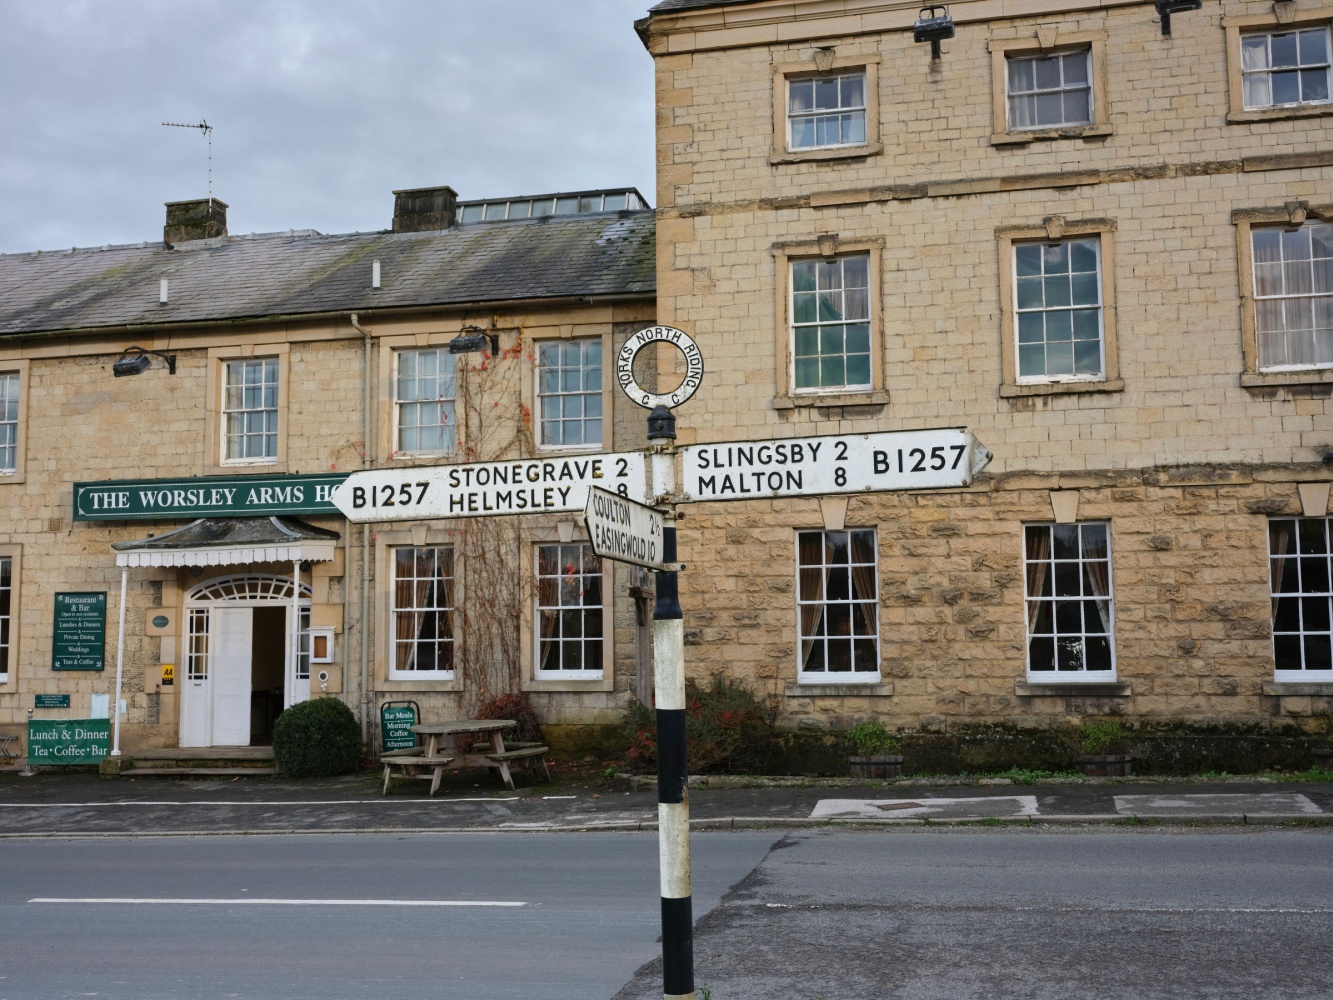 Image name stonegrave helmsley slingsby malton sign north yorkshire the 9 image from the post Stonegrave in Yorkshire.com.